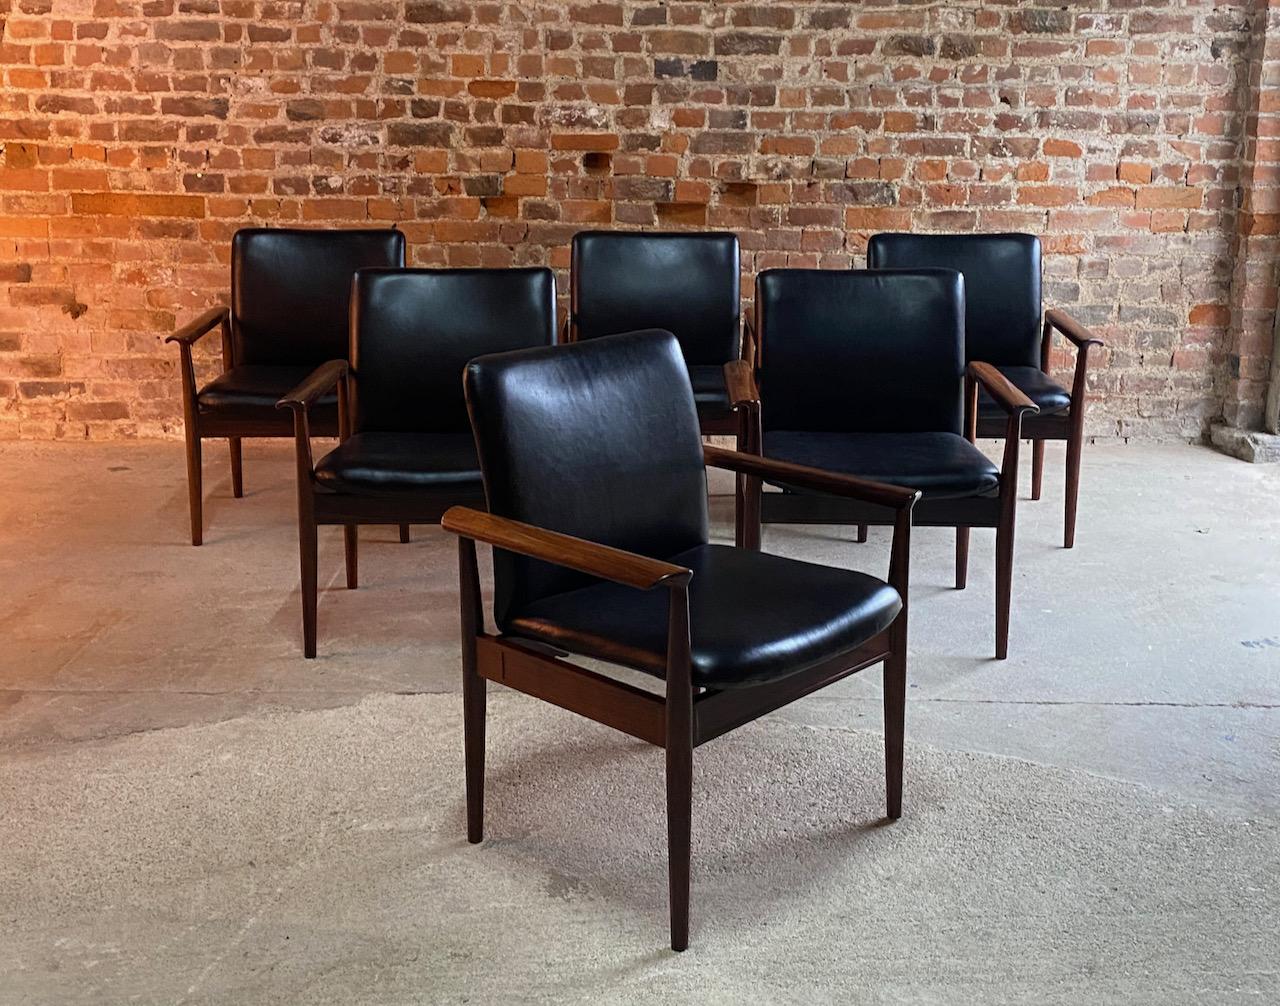 Finn Juhl Model 209 Diplomat chairs in rosewood and leather set of six by Cado, 1965

Midcentury Danish design Finn Juhl Model 209 Diplomat rosewood armchairs manufactured by Cado in Denmark, circa 1965. This model known as the Diplomat is a very